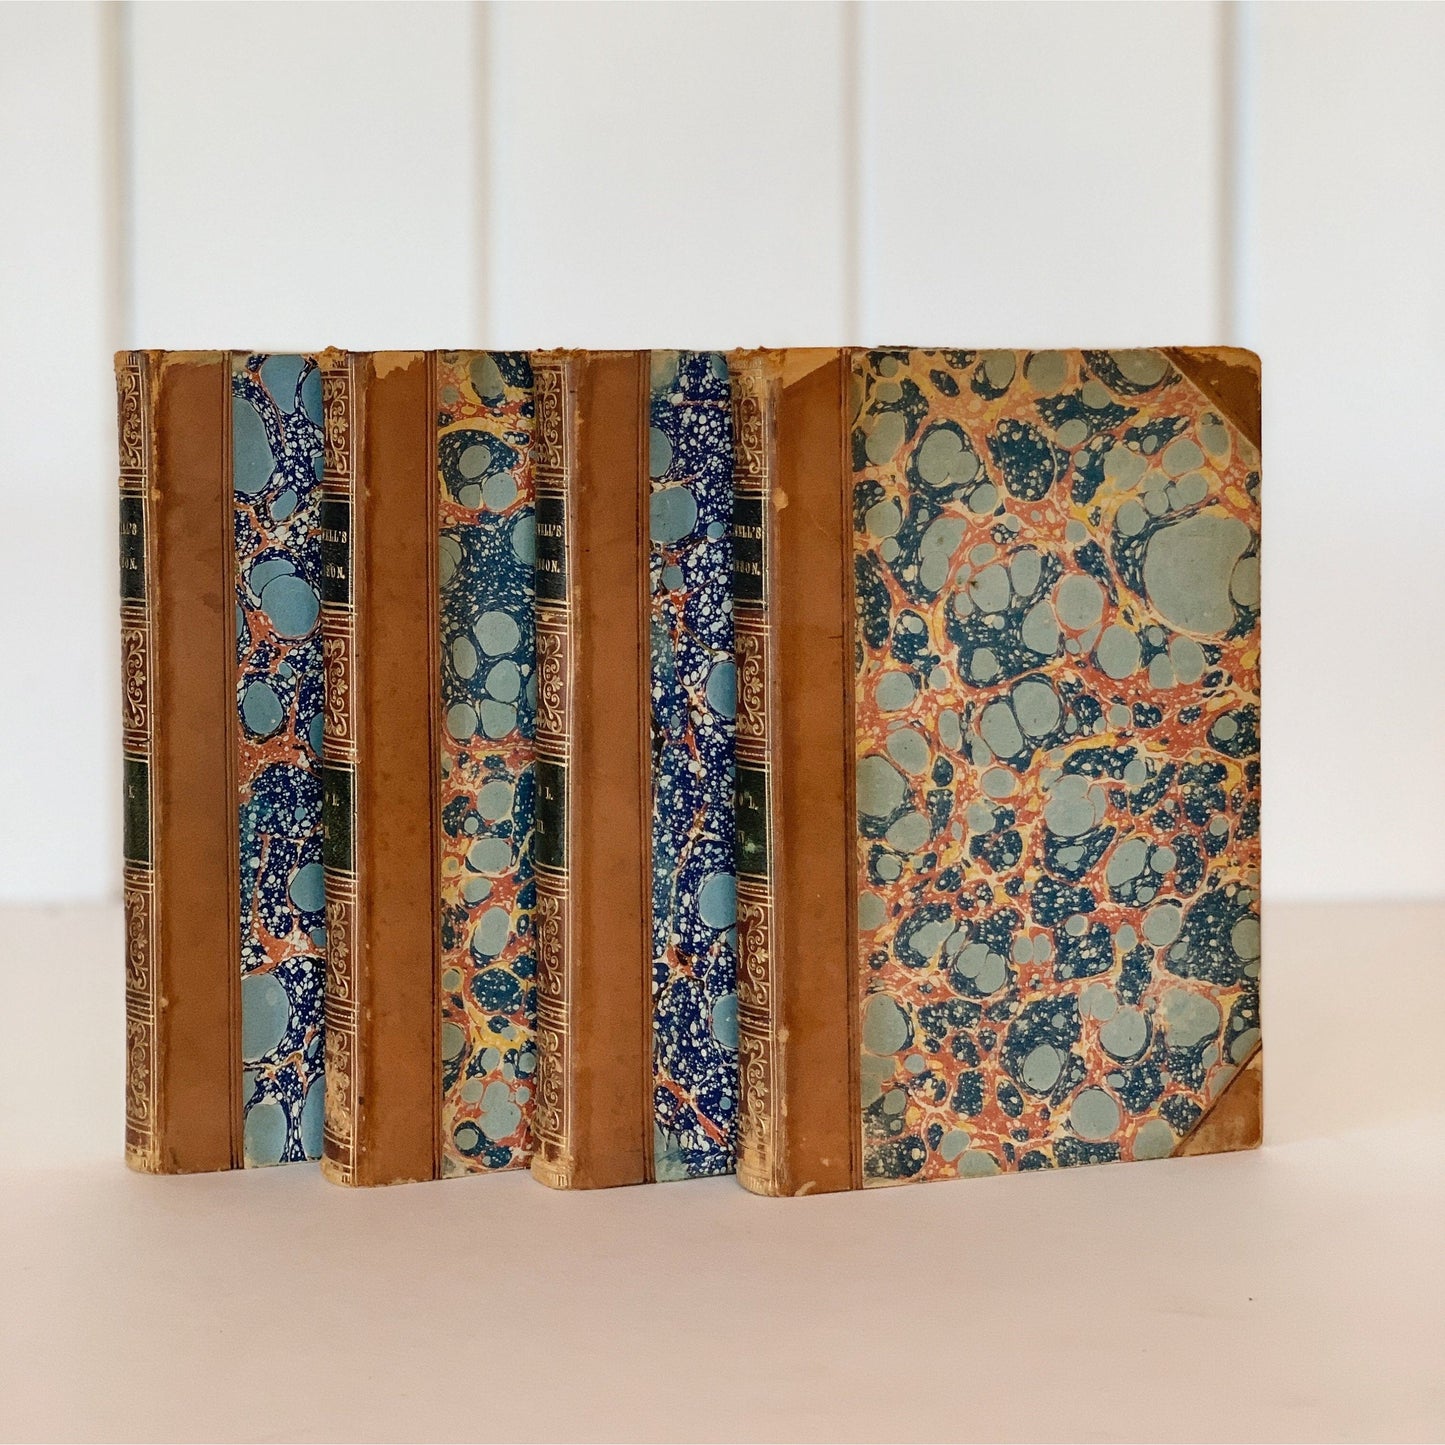 Boswell’s Life of Johnson, Complete Four-Volume Set, 1859, Marbled Leather Bound Books